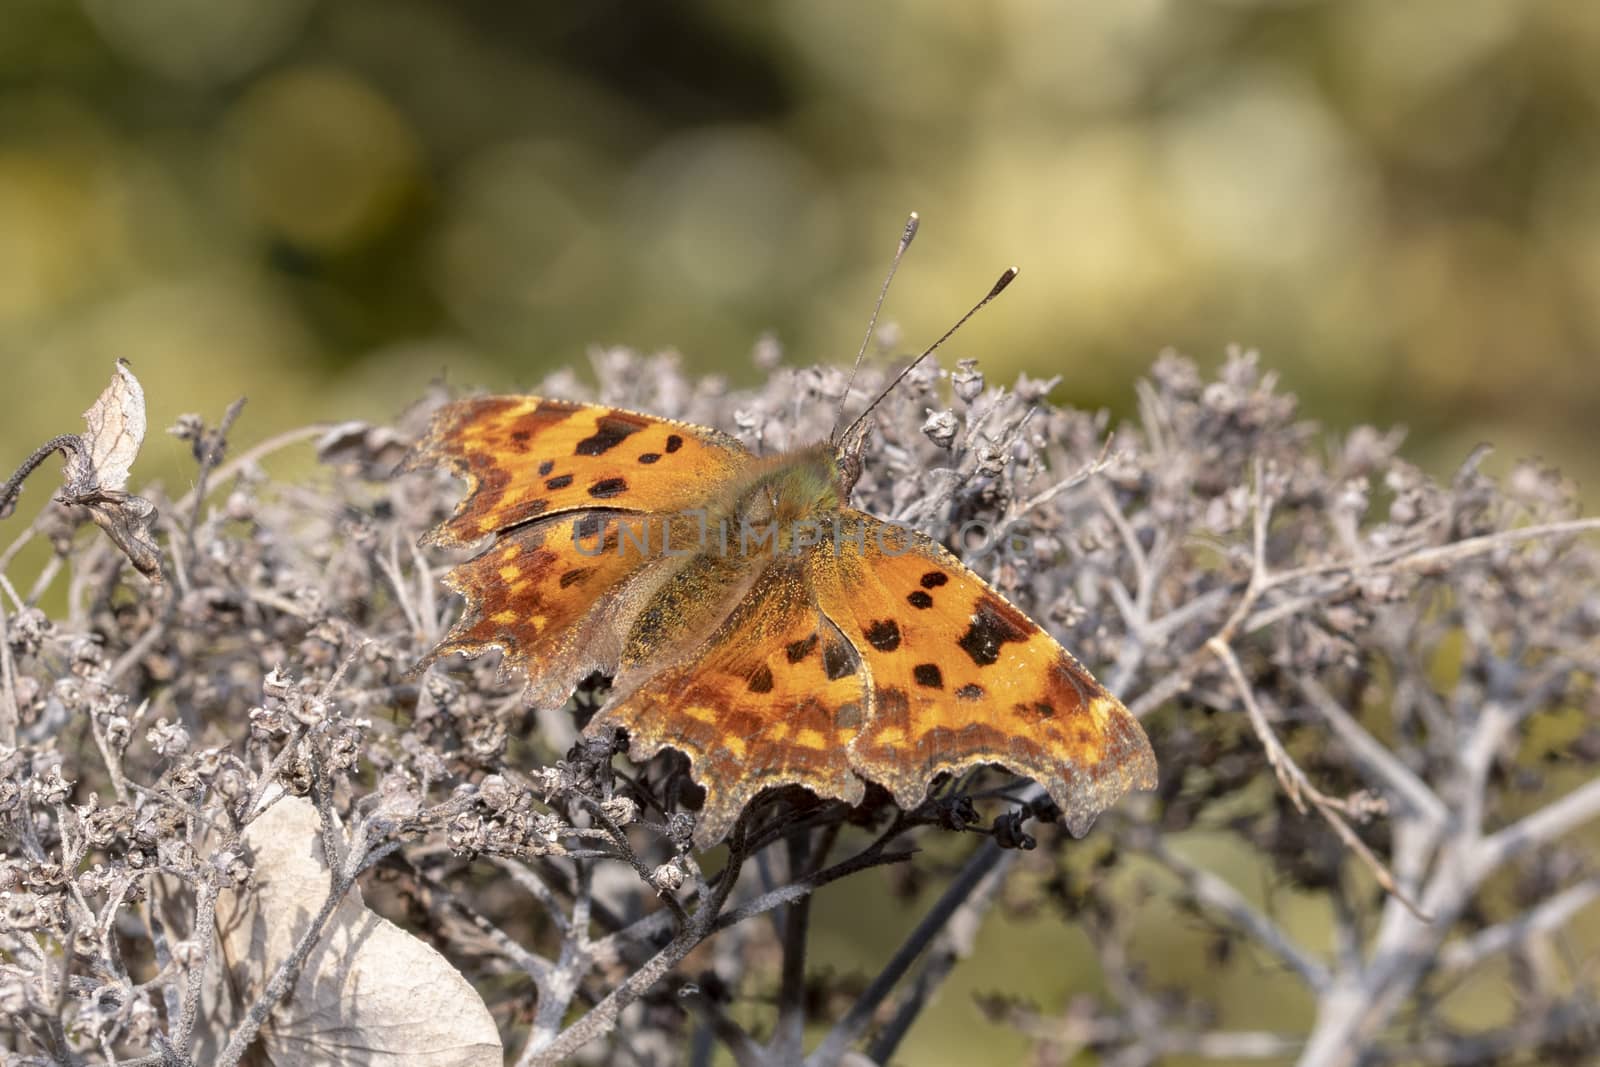 Polygonia c-album (comma) butterfly resting on a dried flower under the sun light by ankorlight